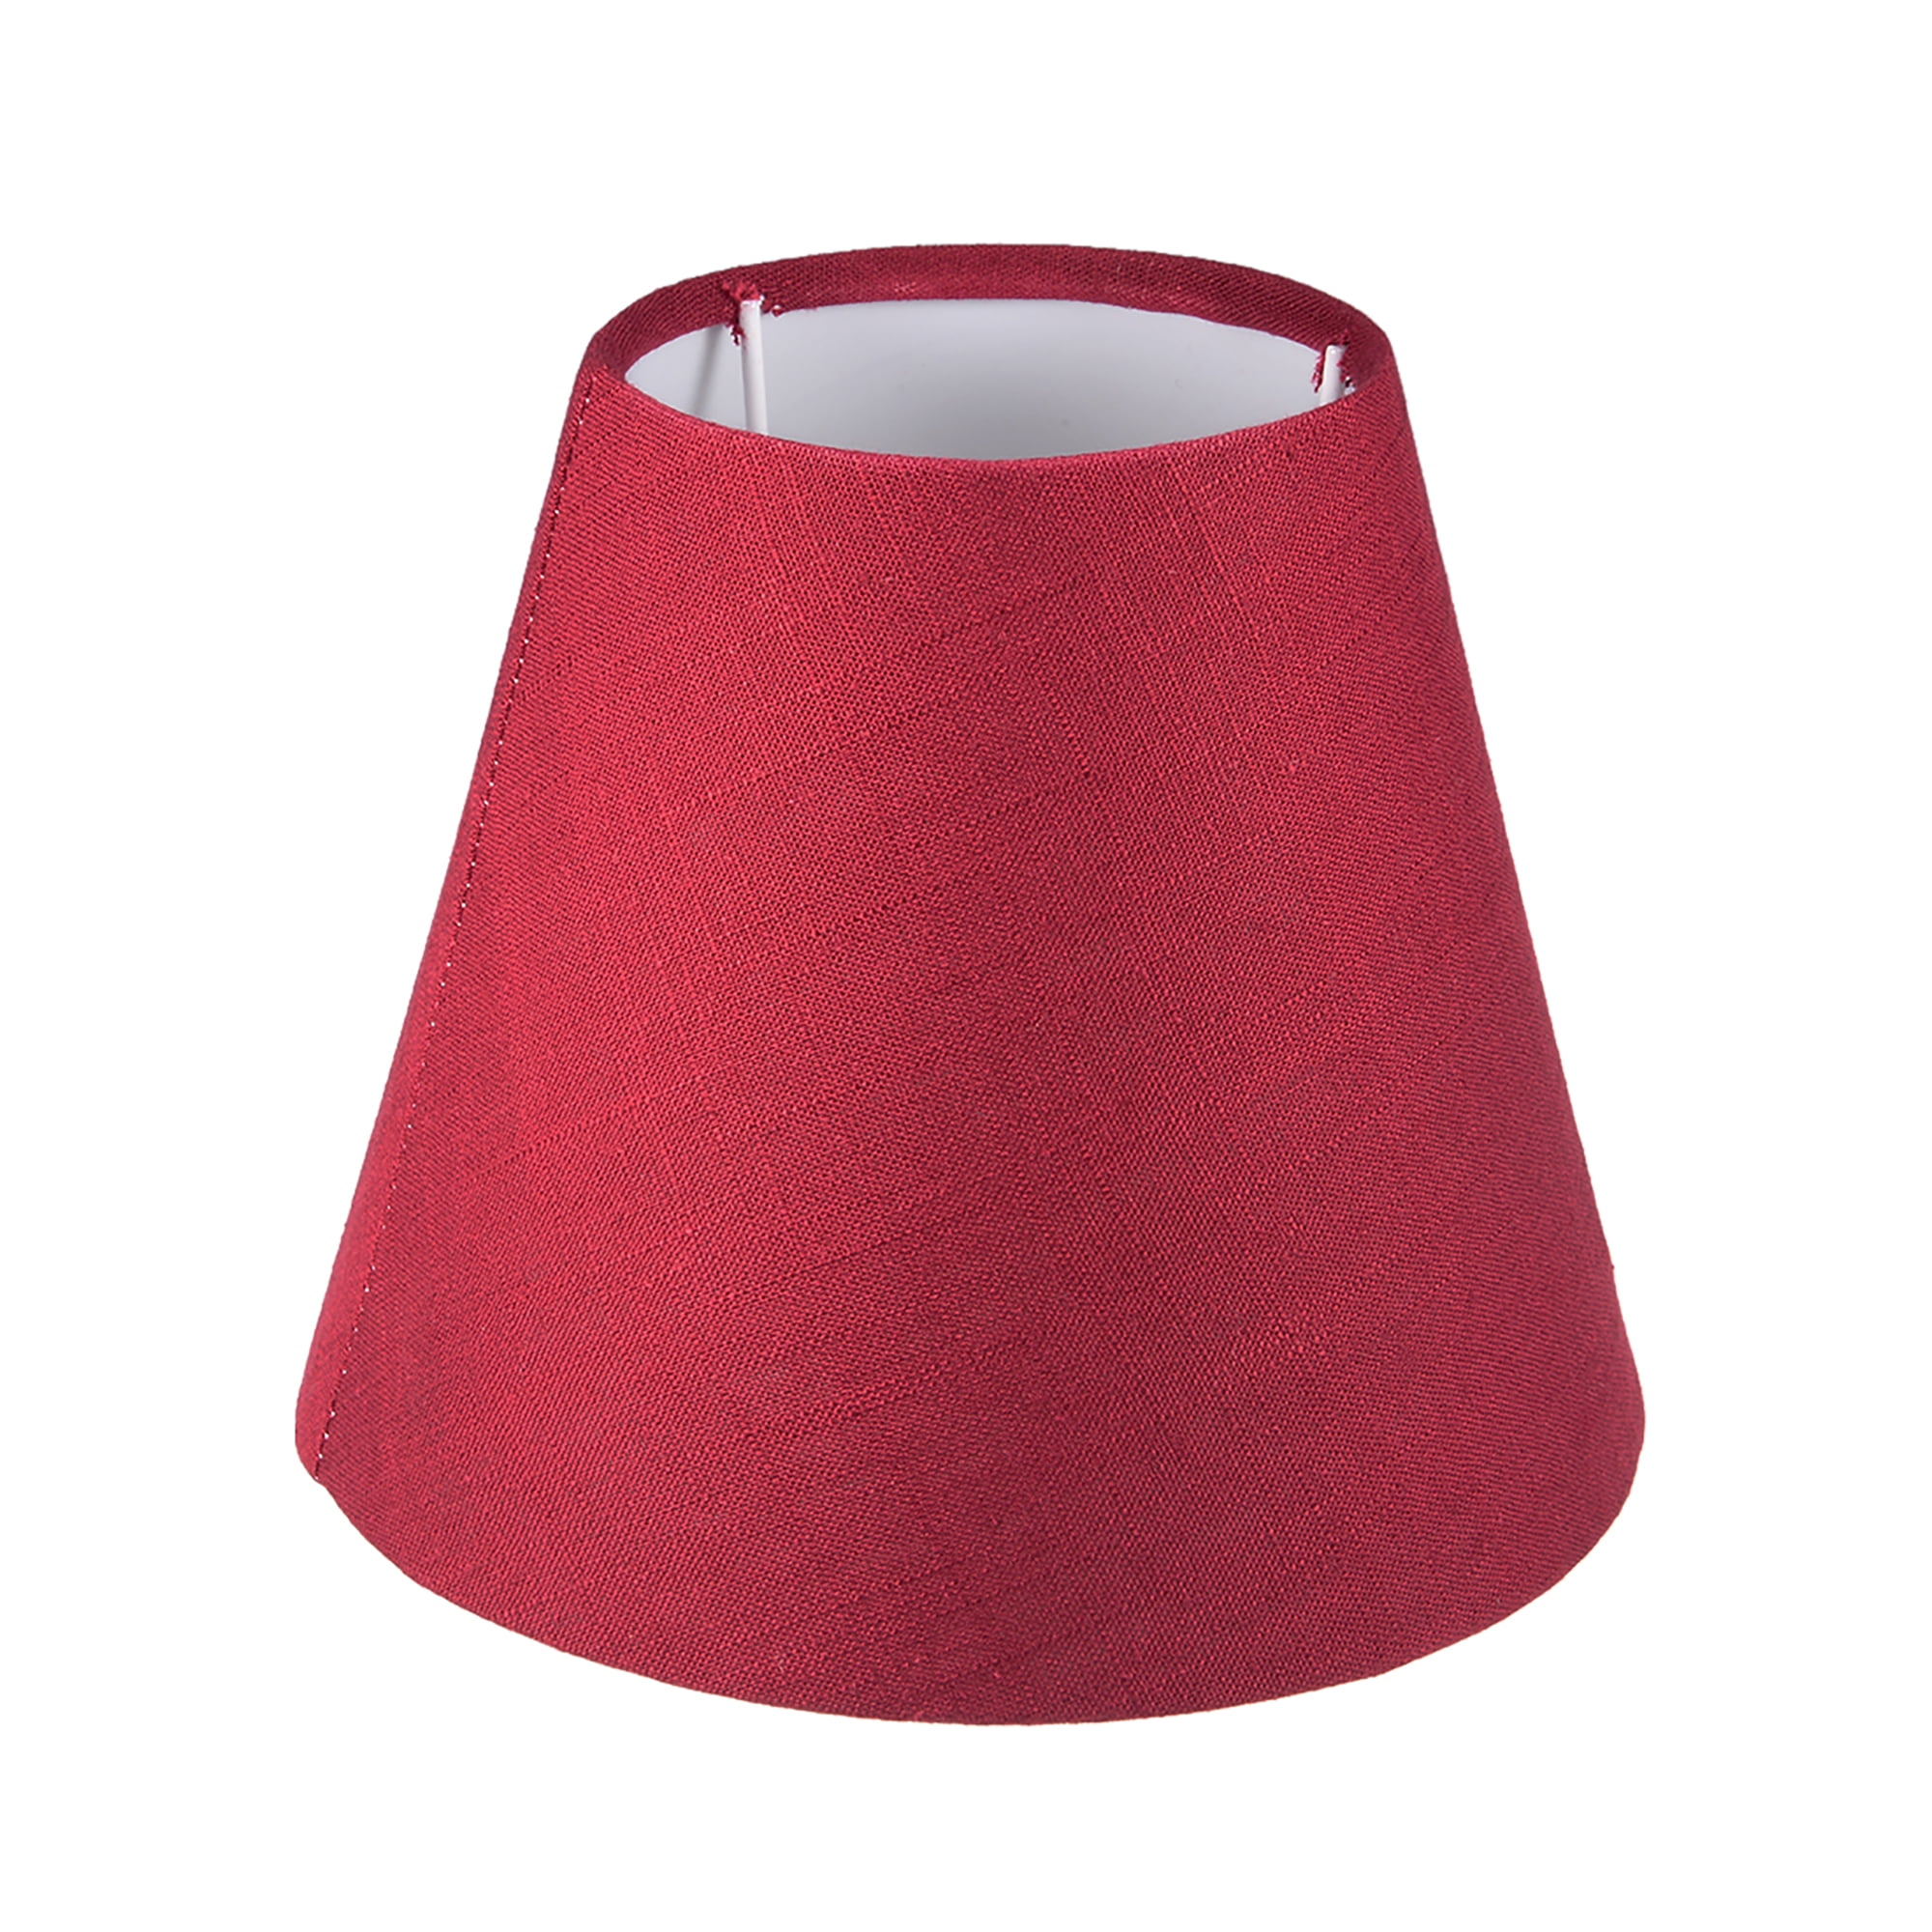 1x Red Textured Fabric Lampshade Table Lamp Floor Light Shade Cover 